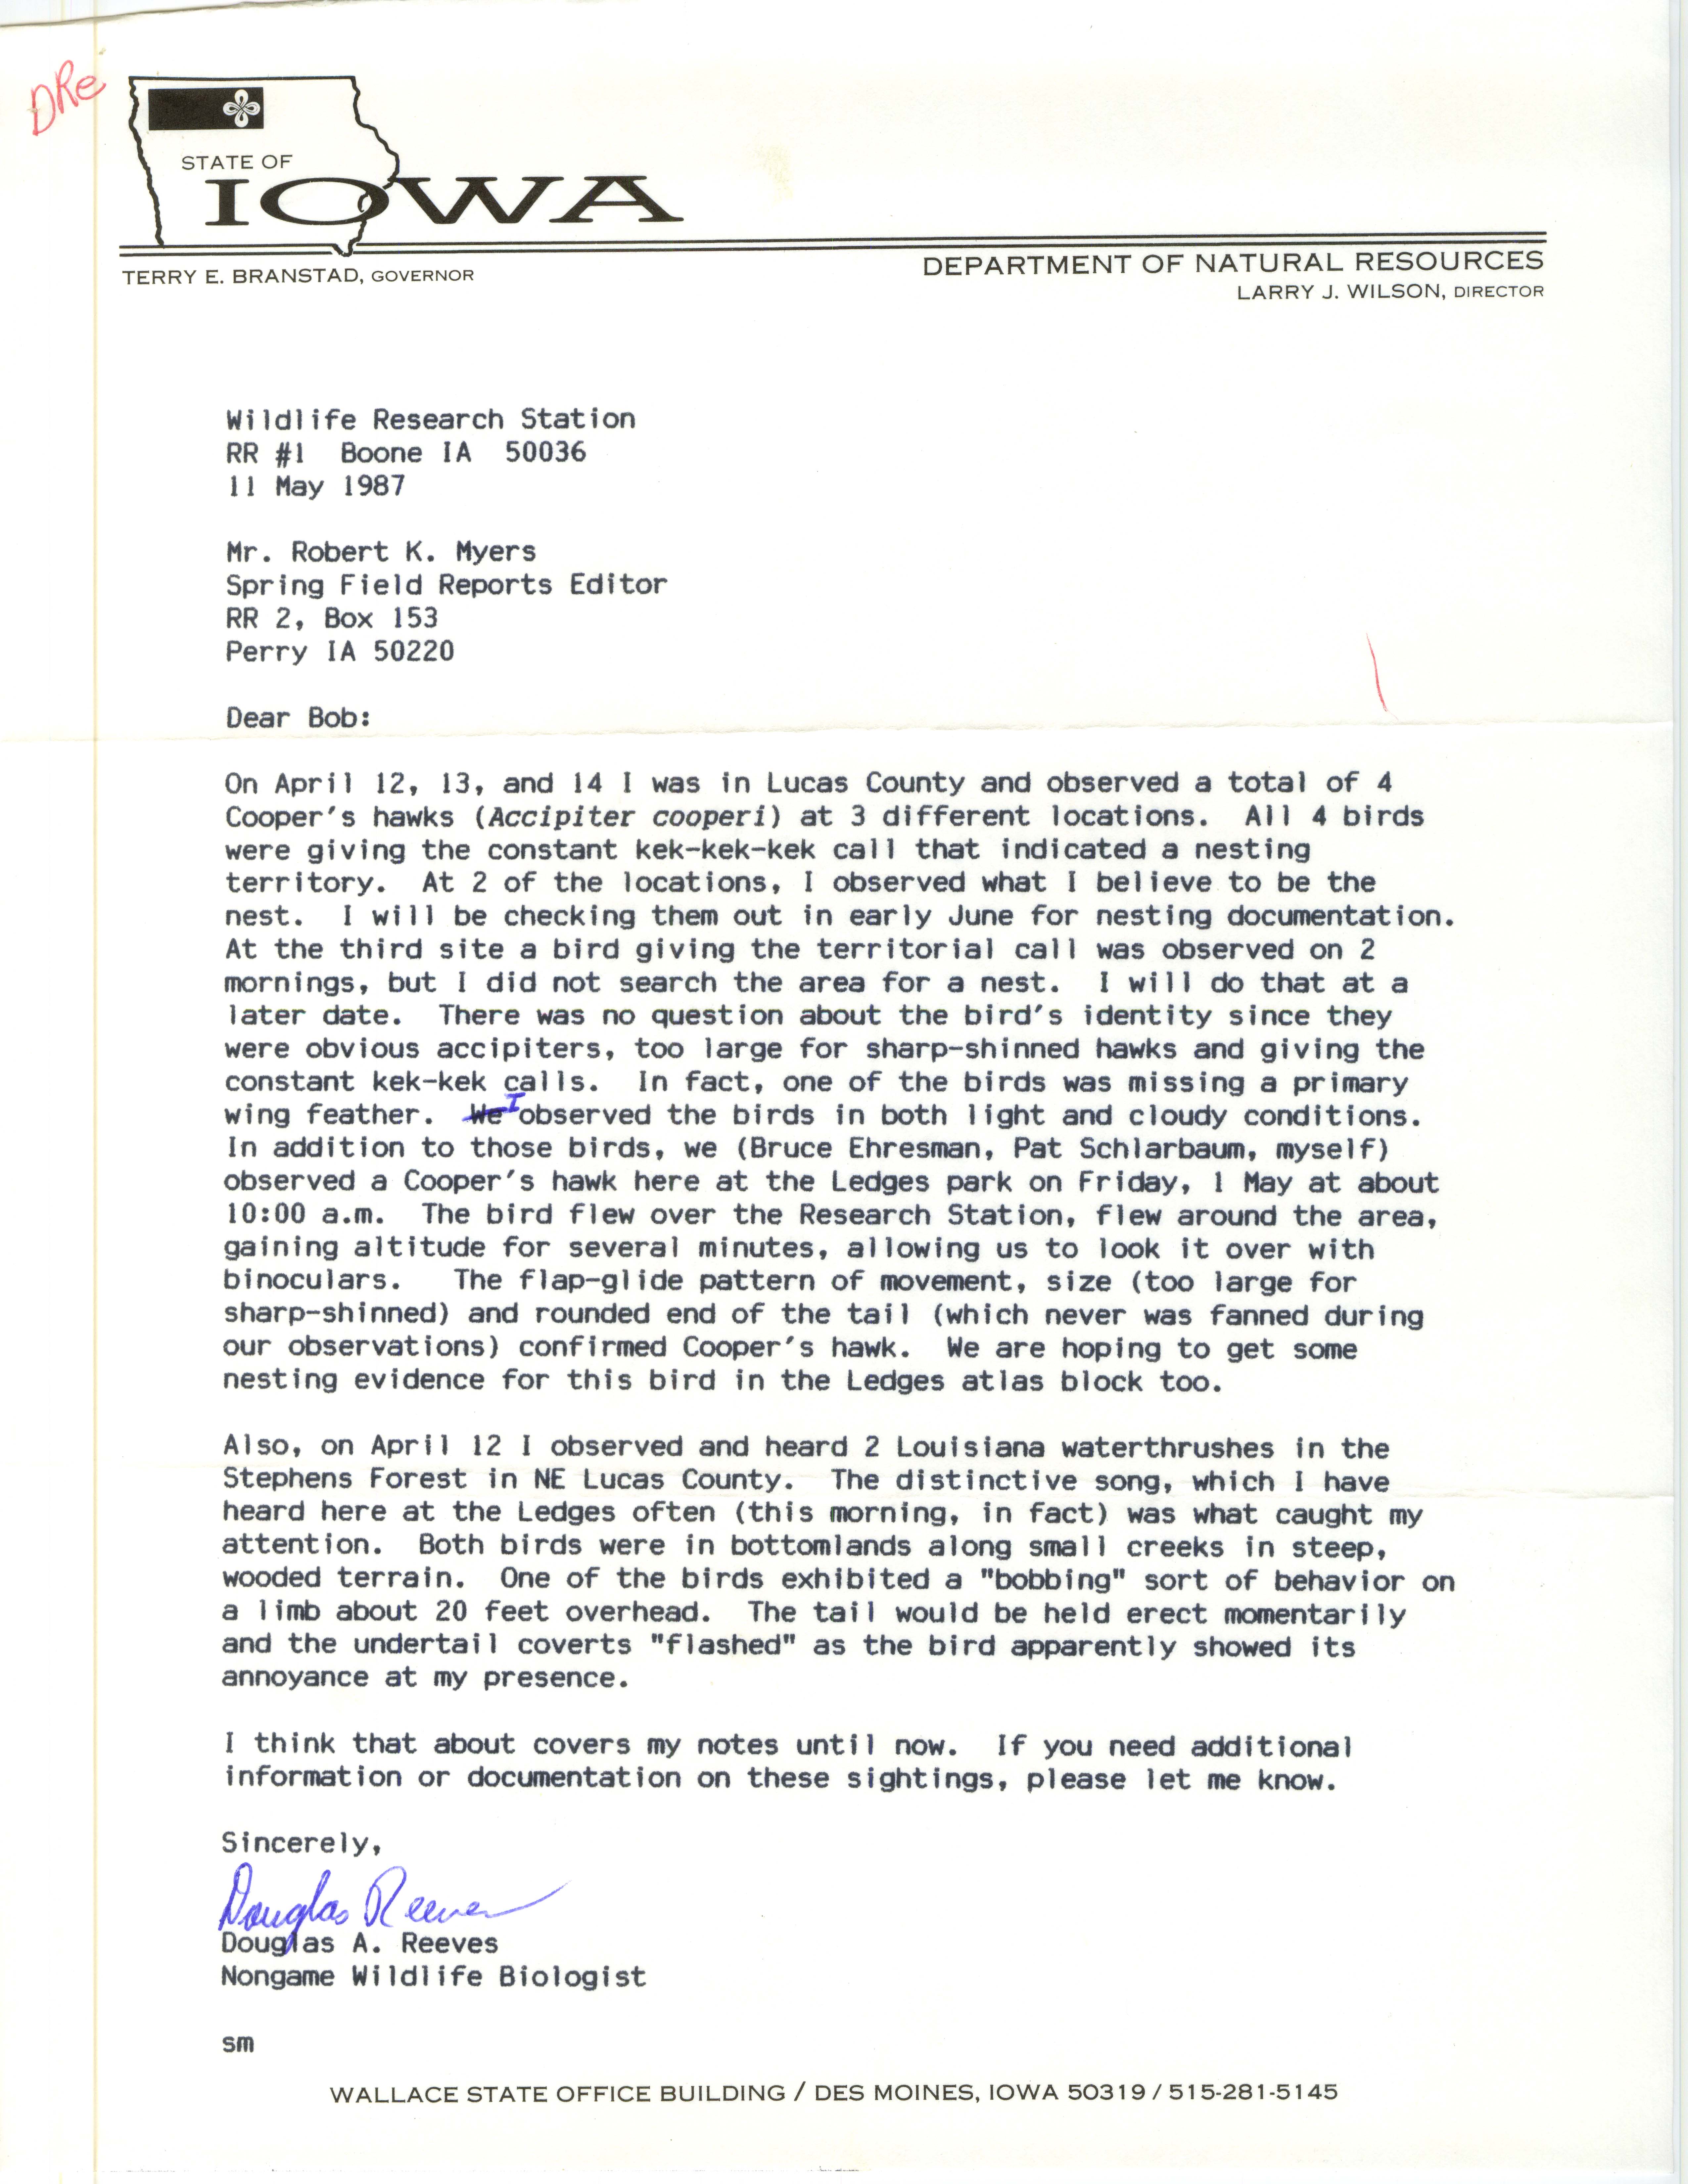 Doug Reeves letter to Robert K. Myers regarding a special sighting report, May 11, 1987